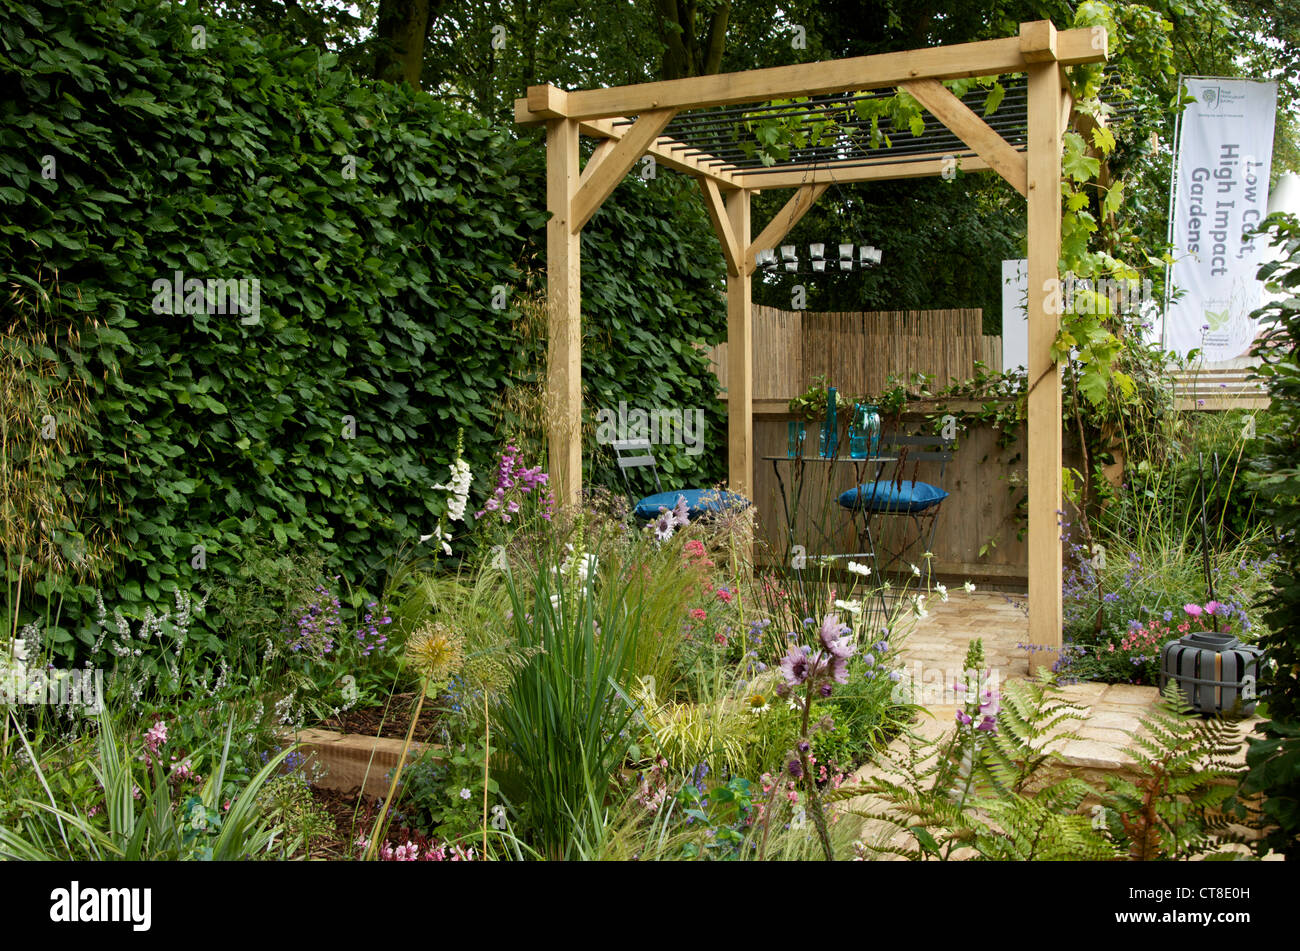 A Compromising Situation Garden at RHS Hampton Court Palace Flower Show London UK 2nd July 2012 designed by Richard Wanless Stock Photo